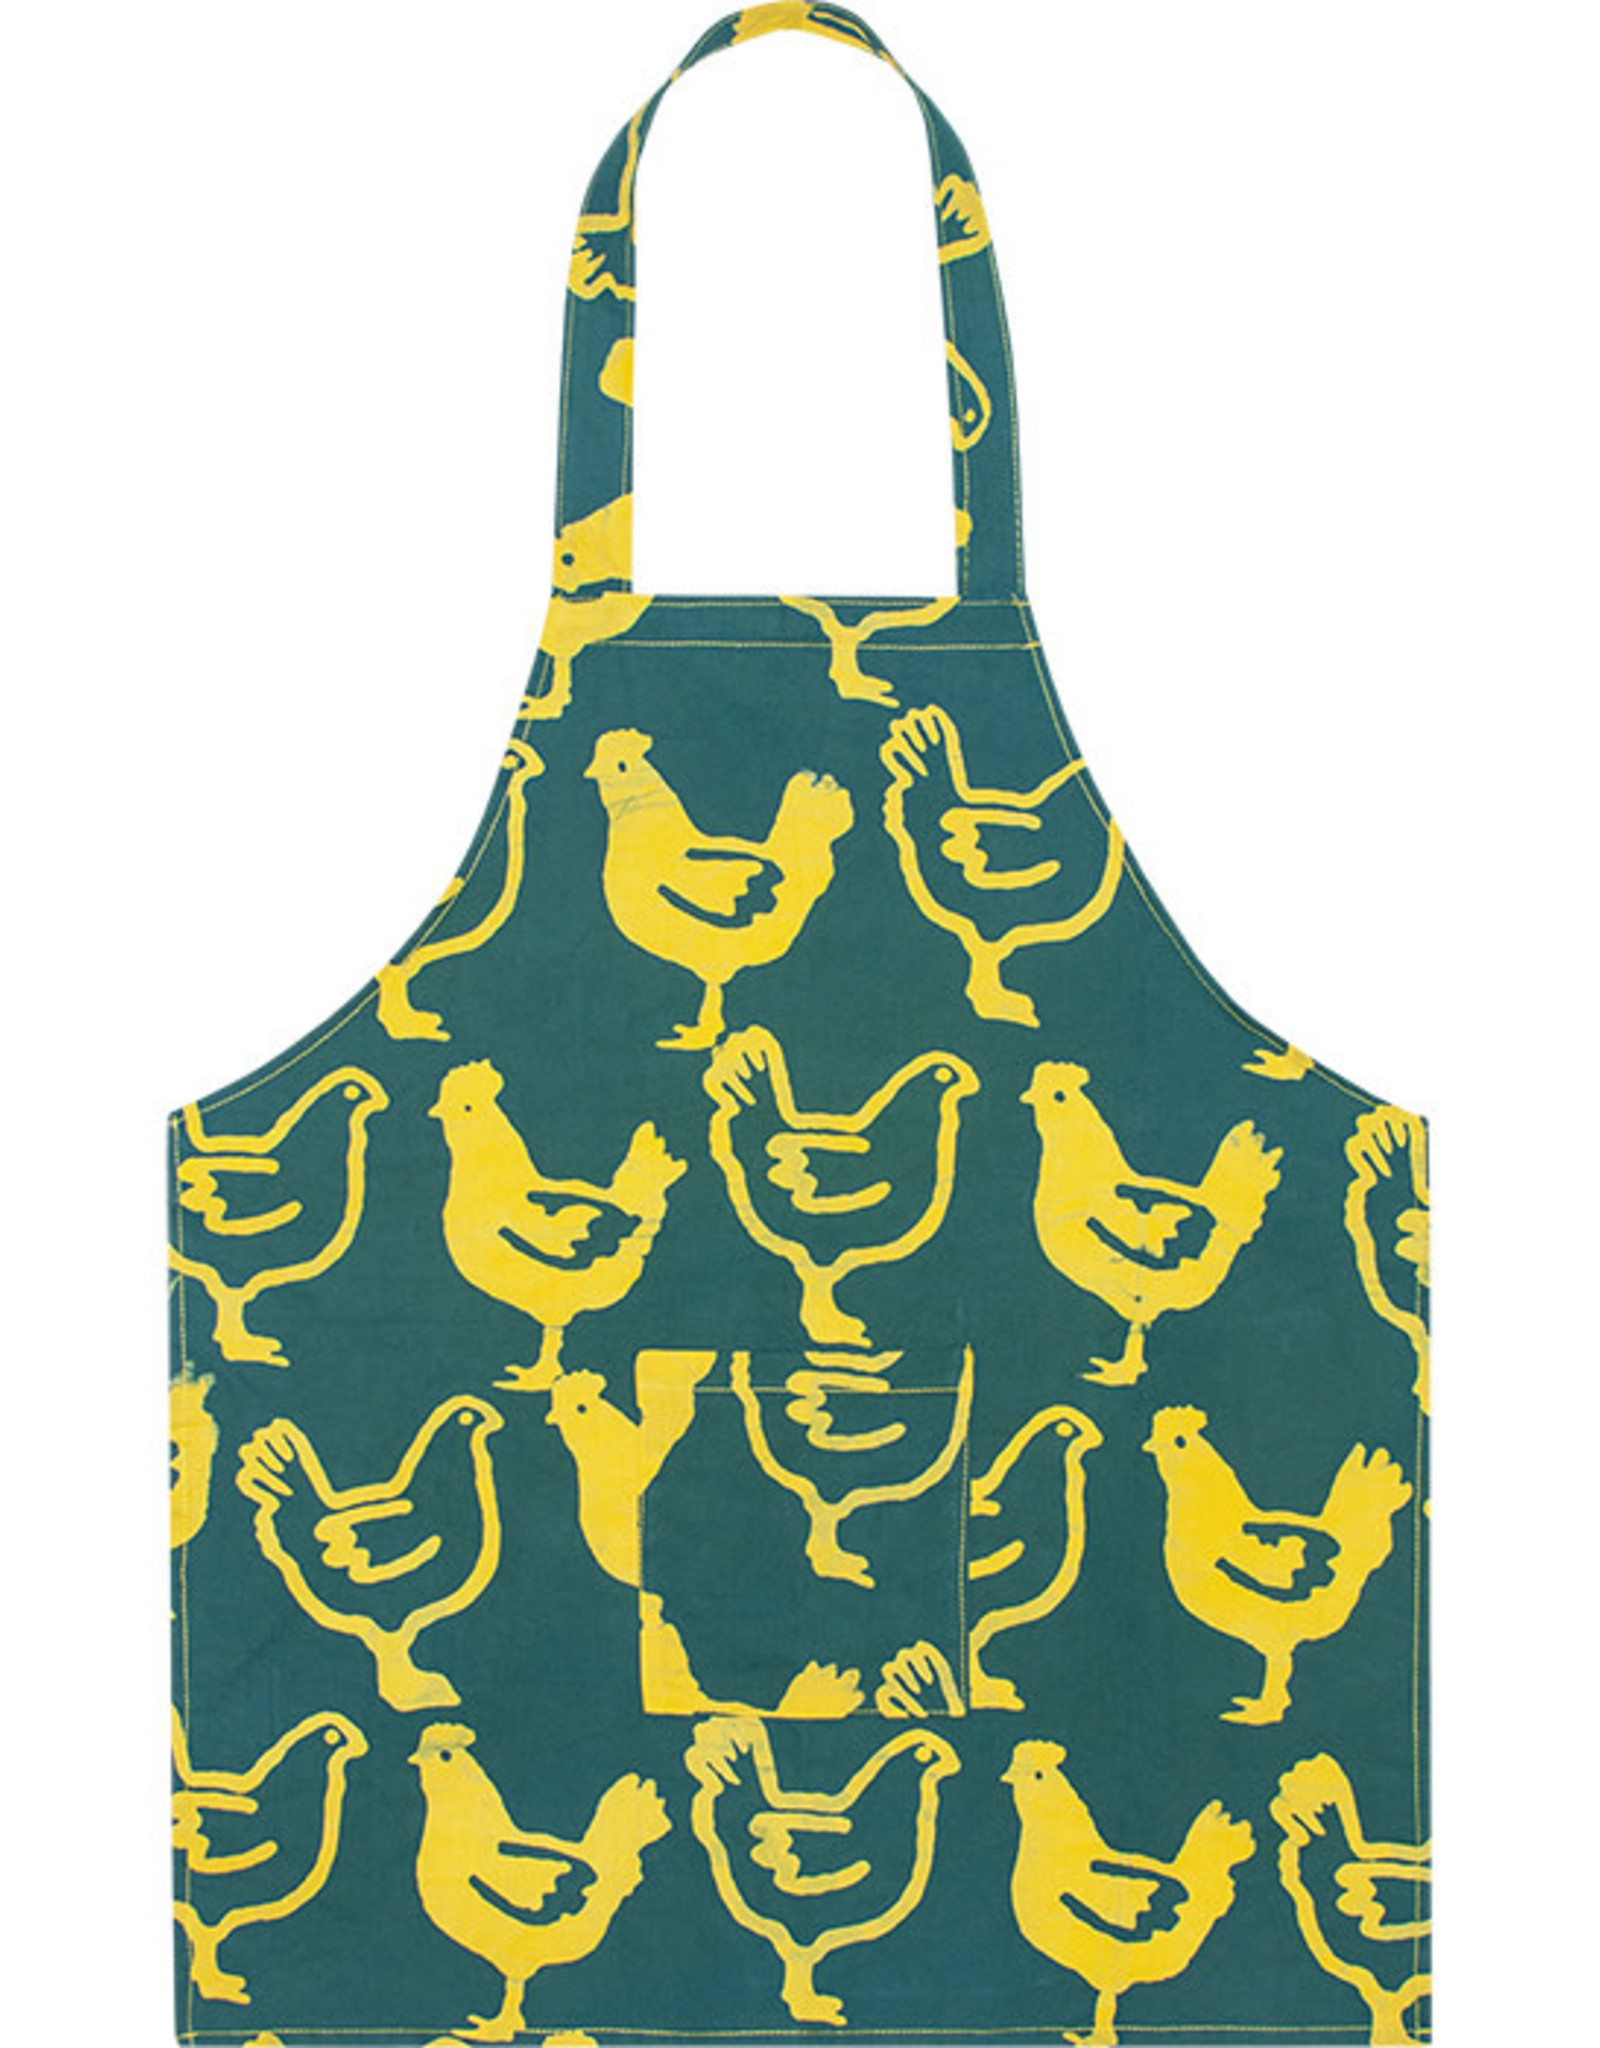 Global Mamas Apron Kids Chickens Teal